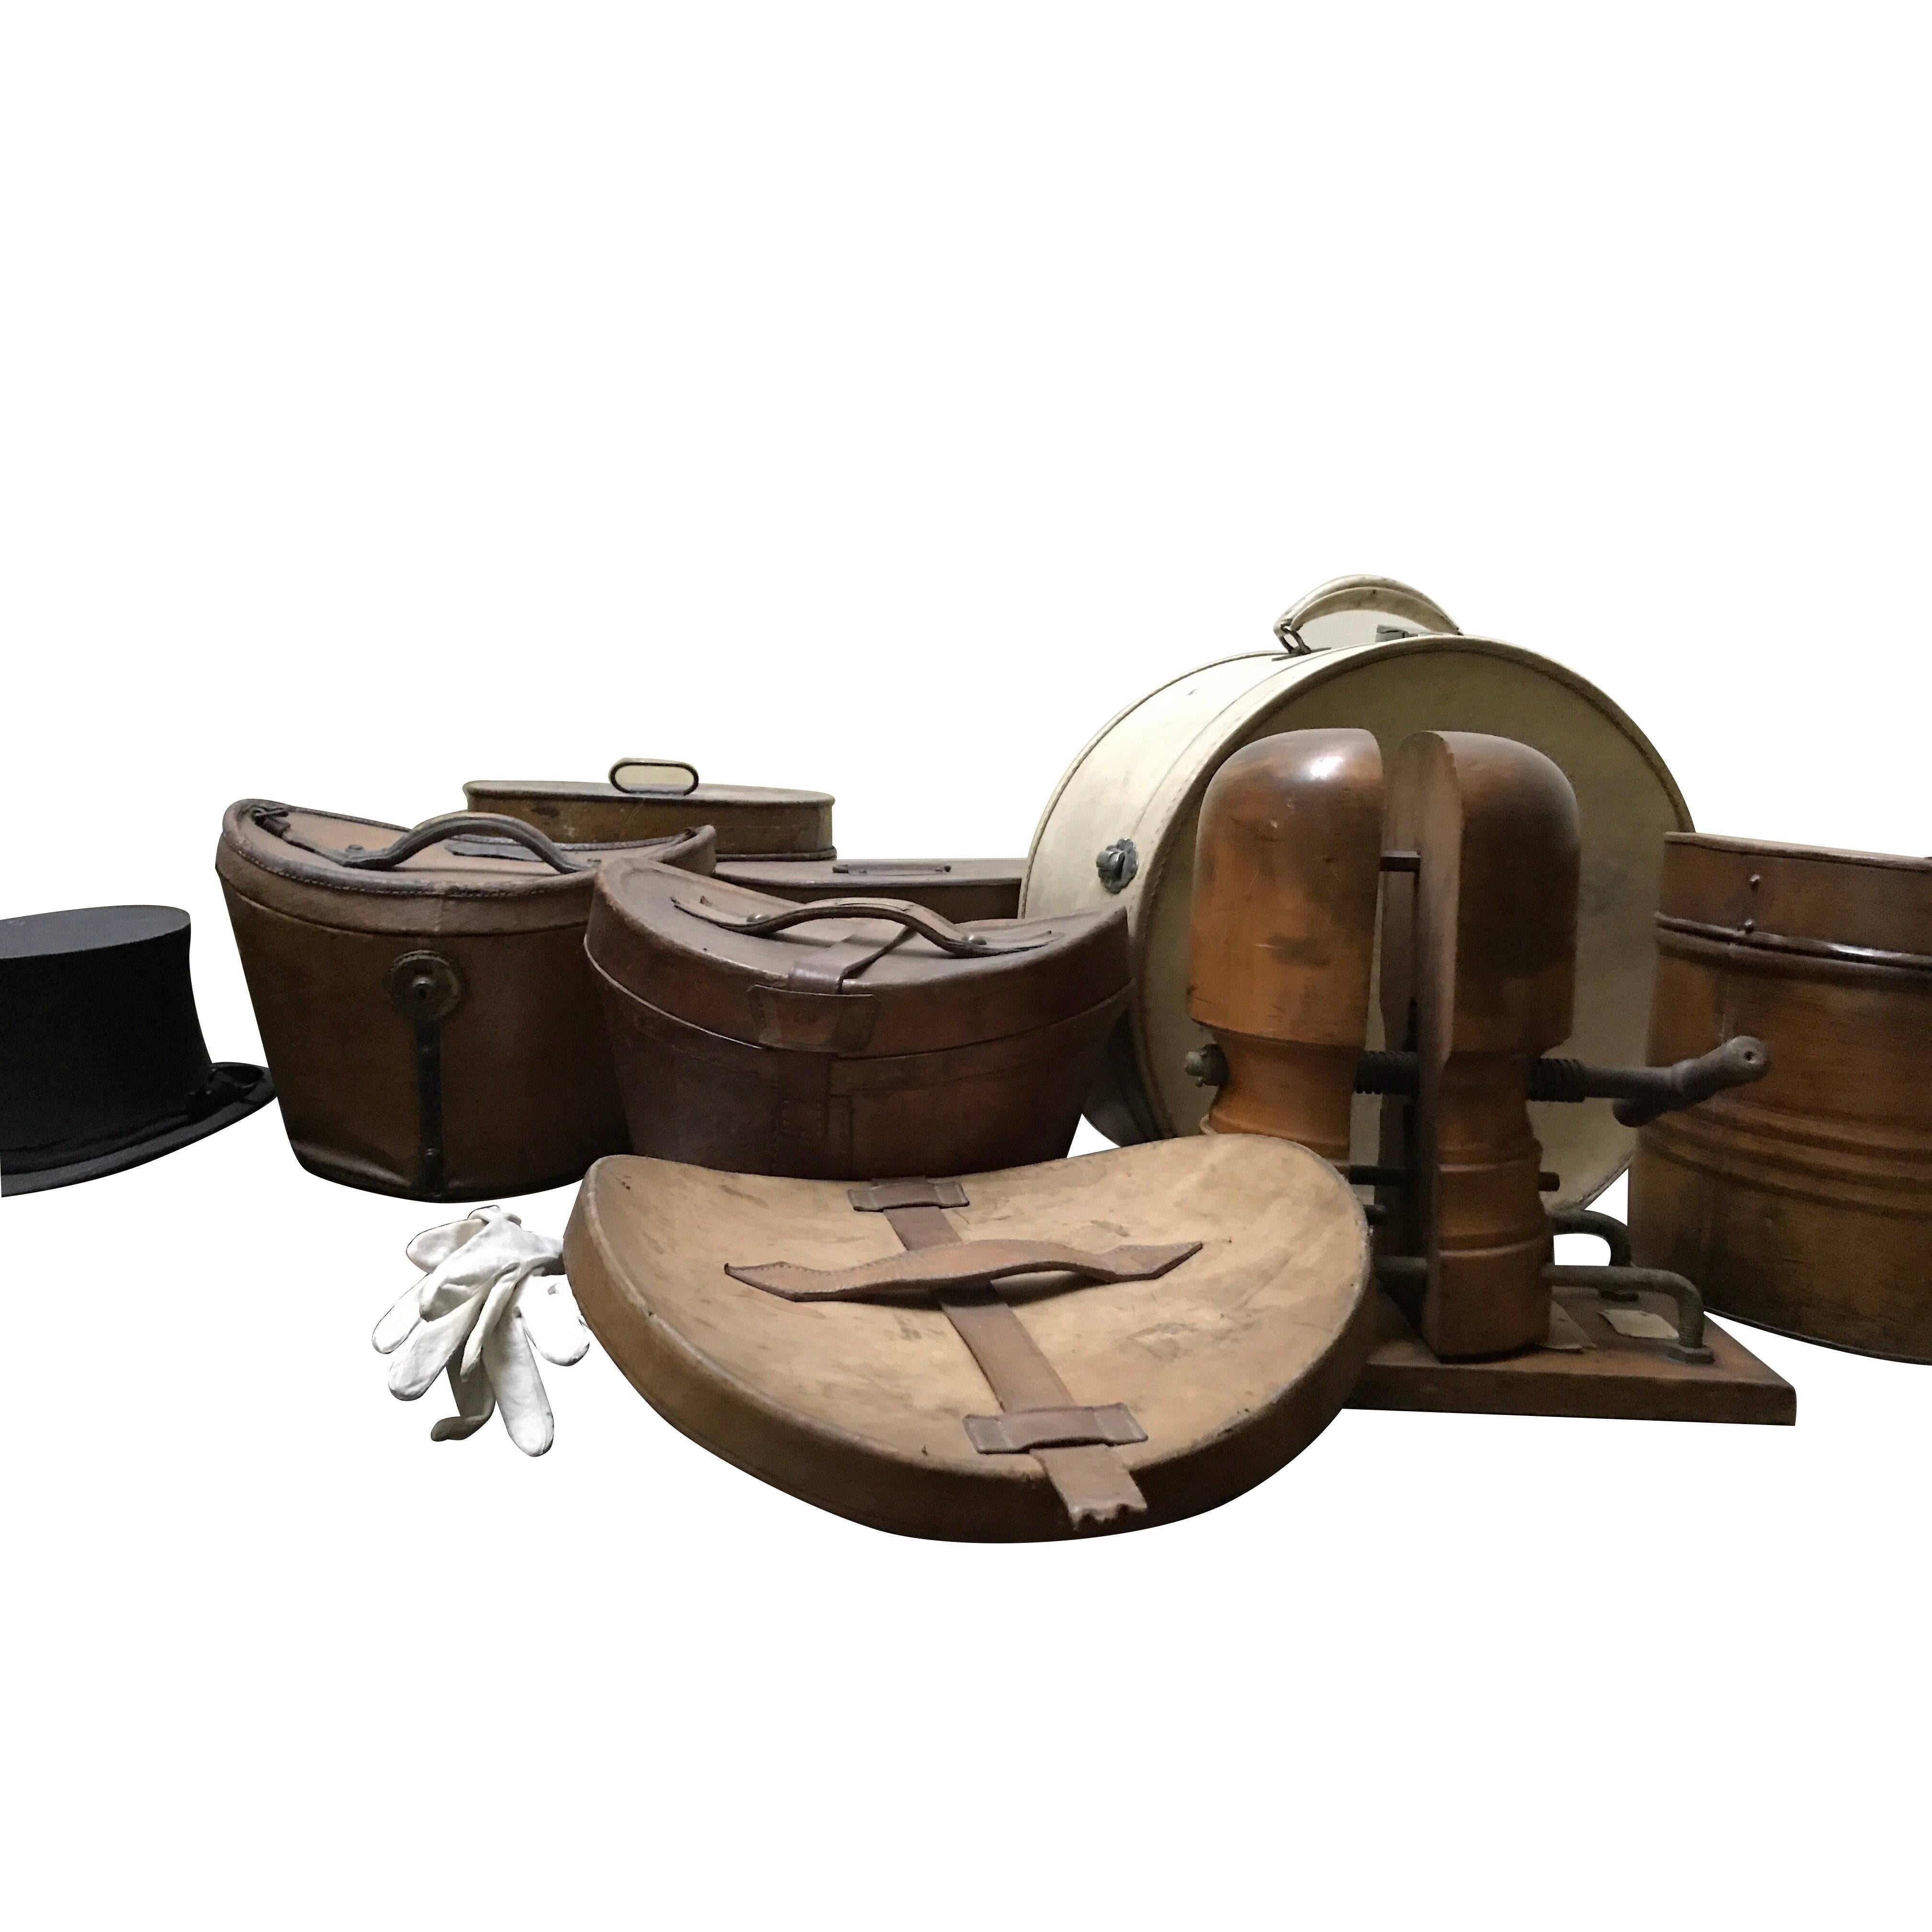 7 Hat box ( es)  in Leather, One of Harrods London, Metal, Chapeau Claque Opera For Sale